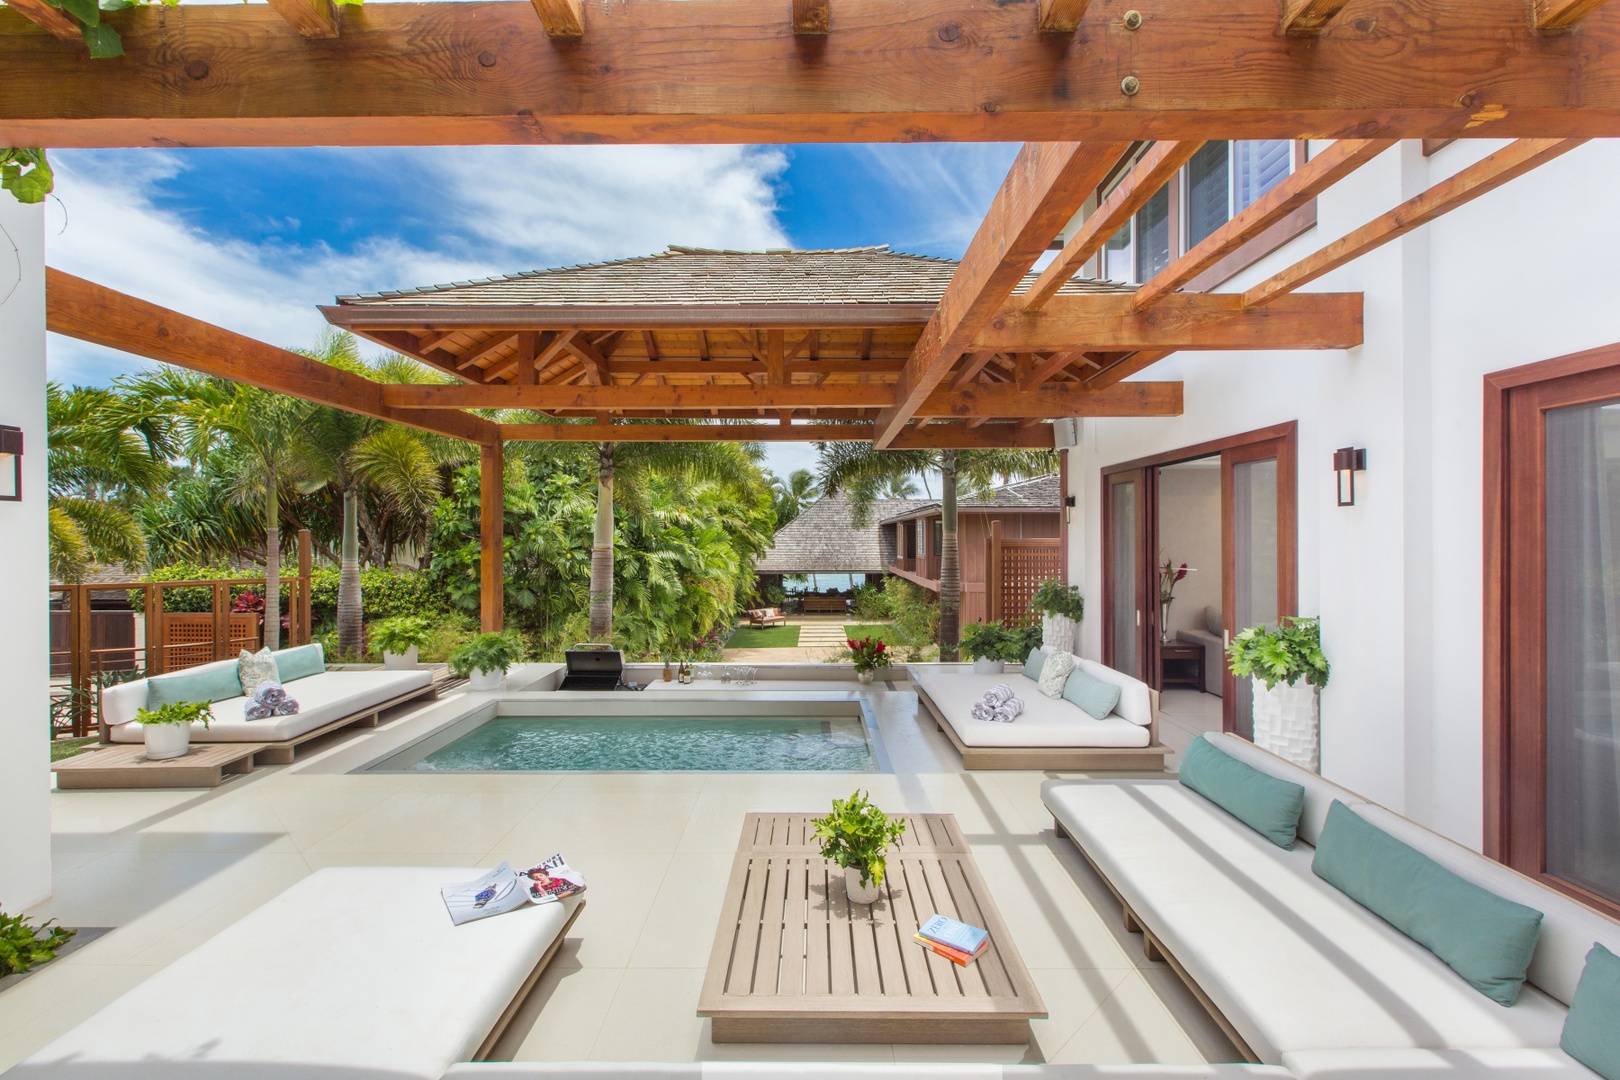 Honolulu Vacation Rentals, Le Reve at Diamond Head* - Jacuzzi Lounge Lani with step bar area pit! Added bonus, if you rent the front house in combination with this back house, the gate between the two properties can be opened!